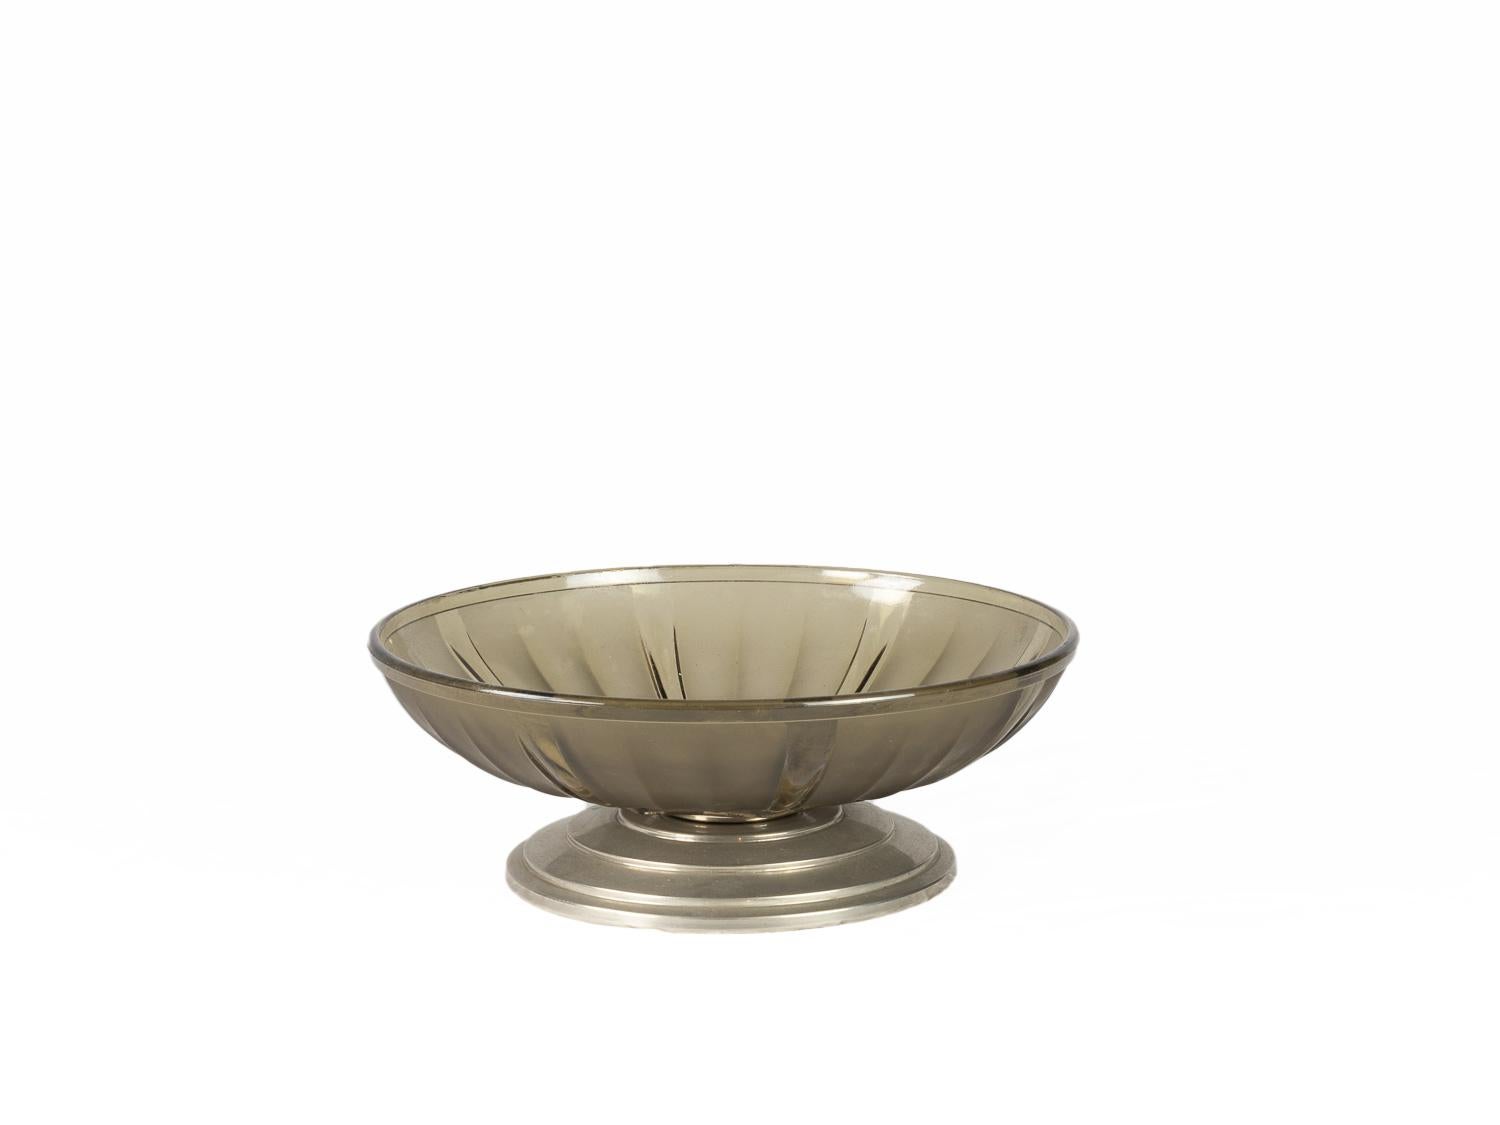 A Greyish glass centerpiece in smoked glass with metal base with pedestal